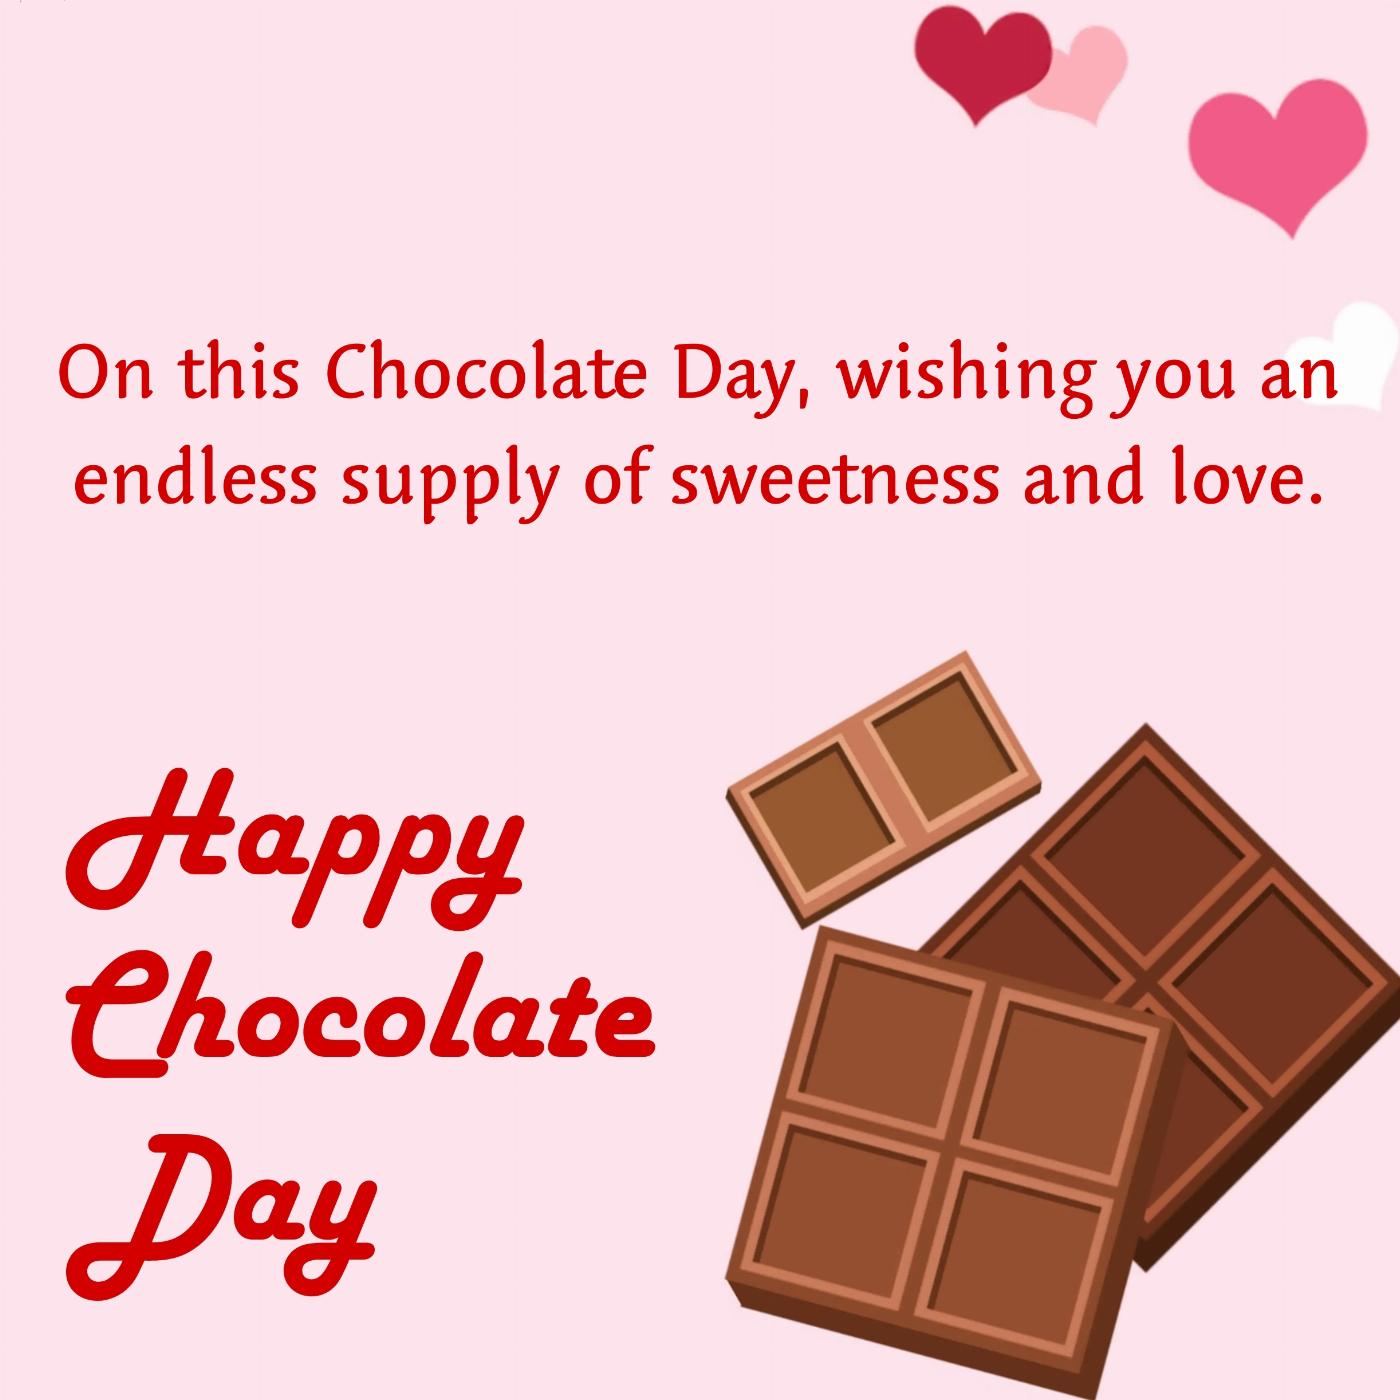 On this Chocolate Day wishing you an endless supply